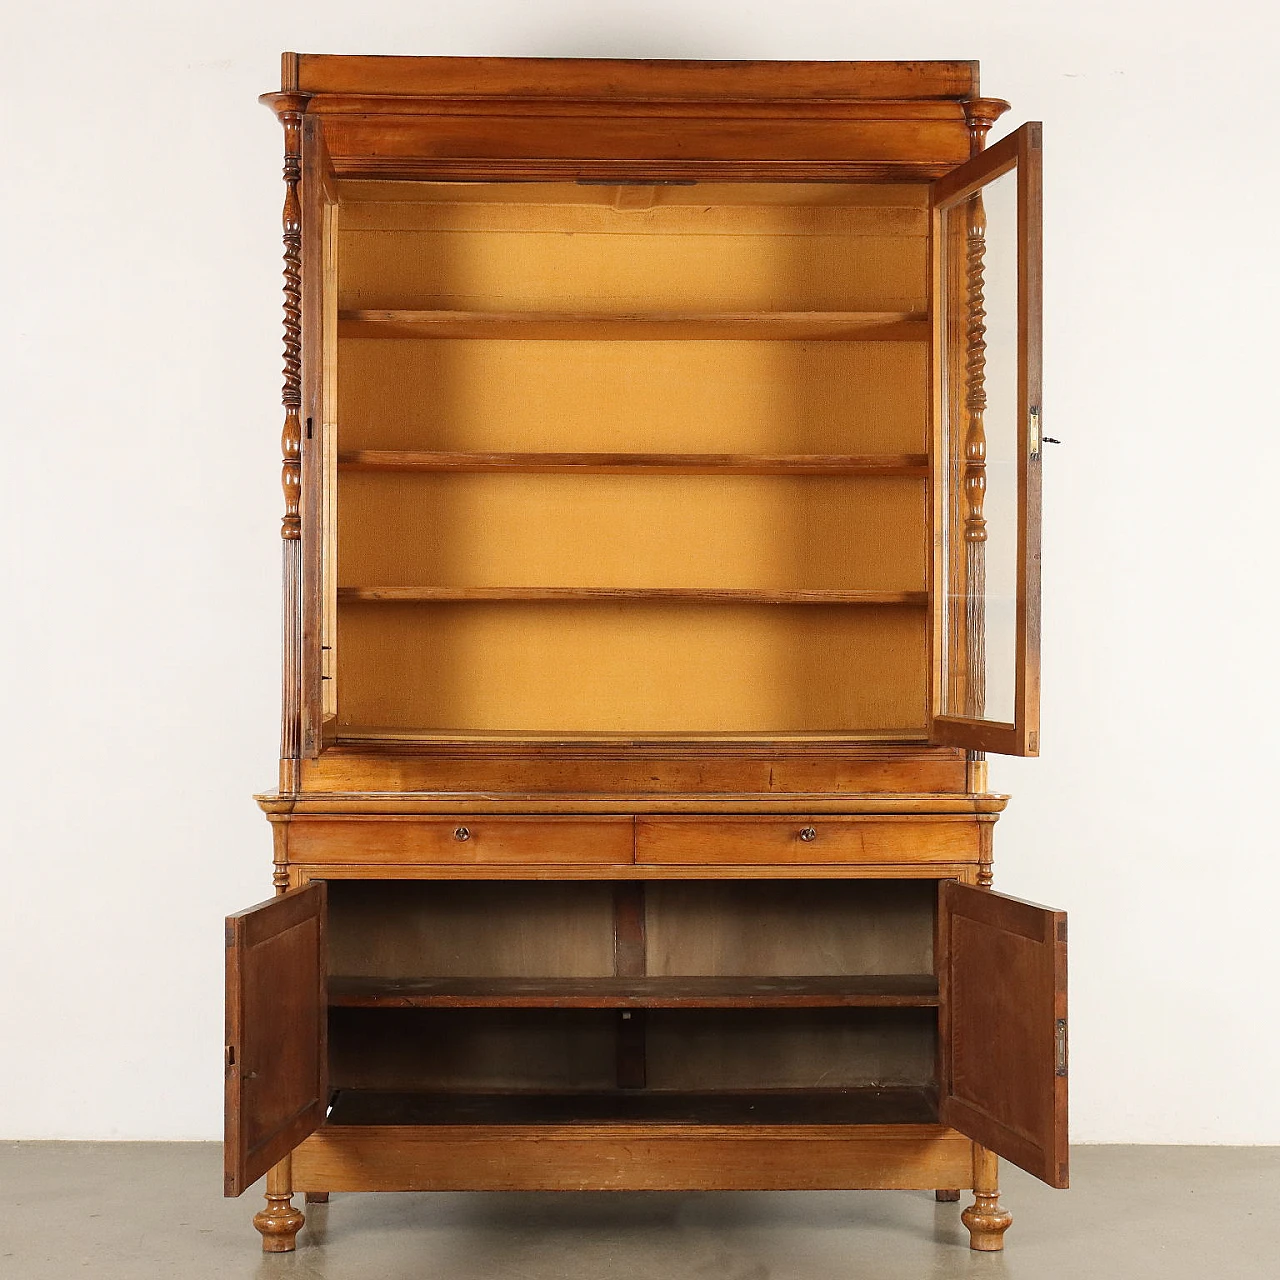 Manzoniana walnut bookcase with display case, second quarter 19th century 3